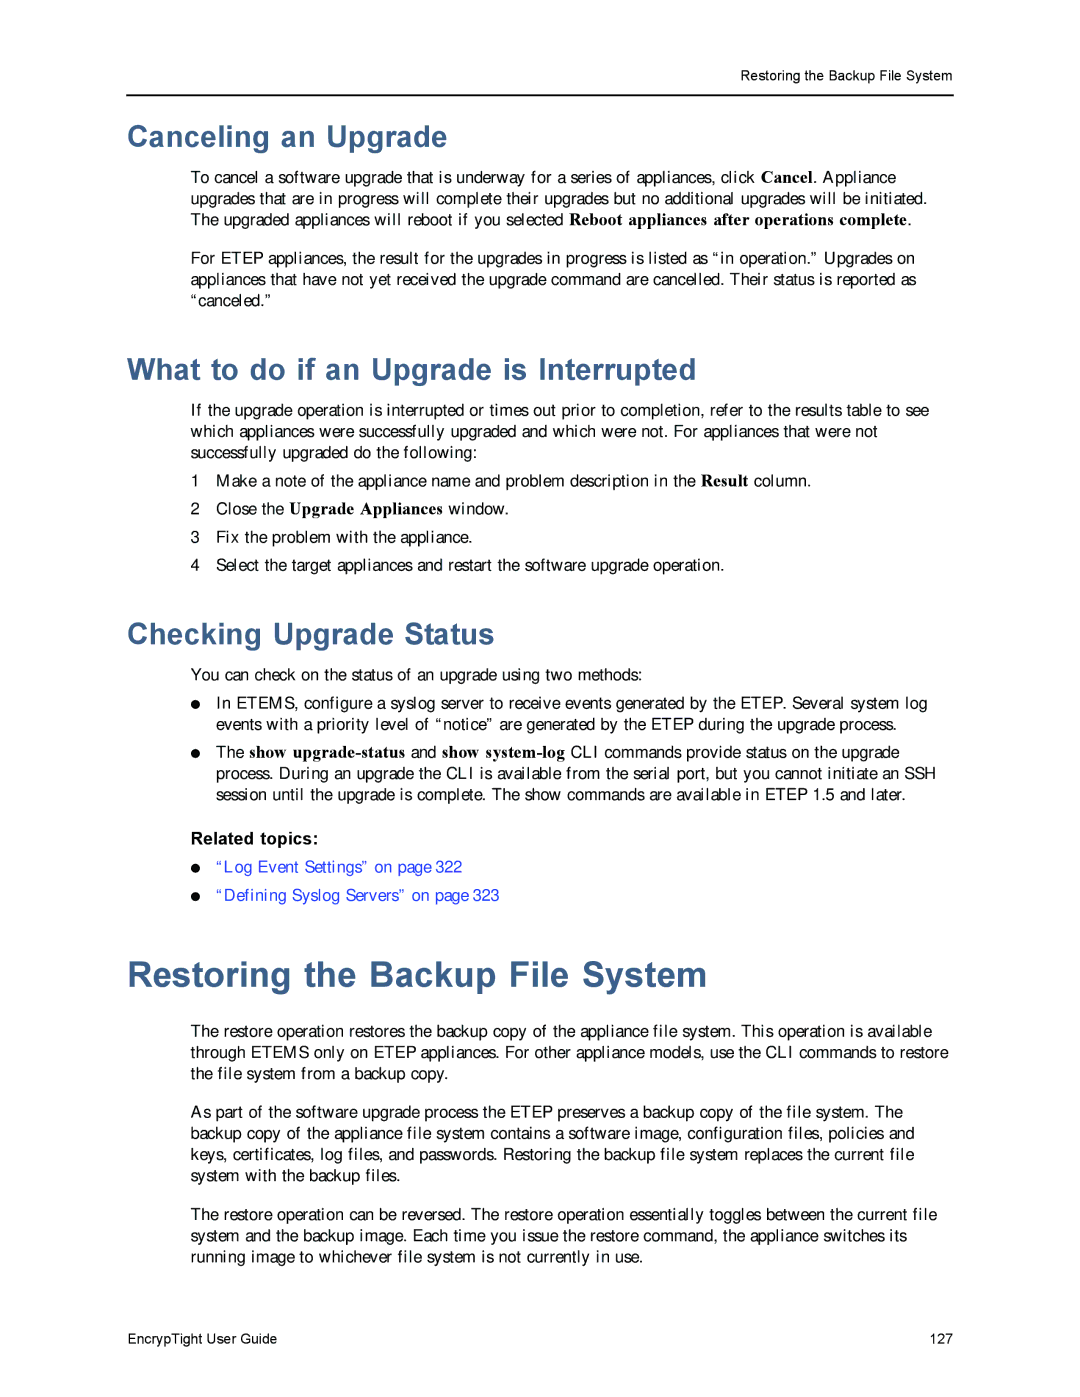 Black Box EncrypTight Restoring the Backup File System, Canceling an Upgrade, What to do if an Upgrade is Interrupted 